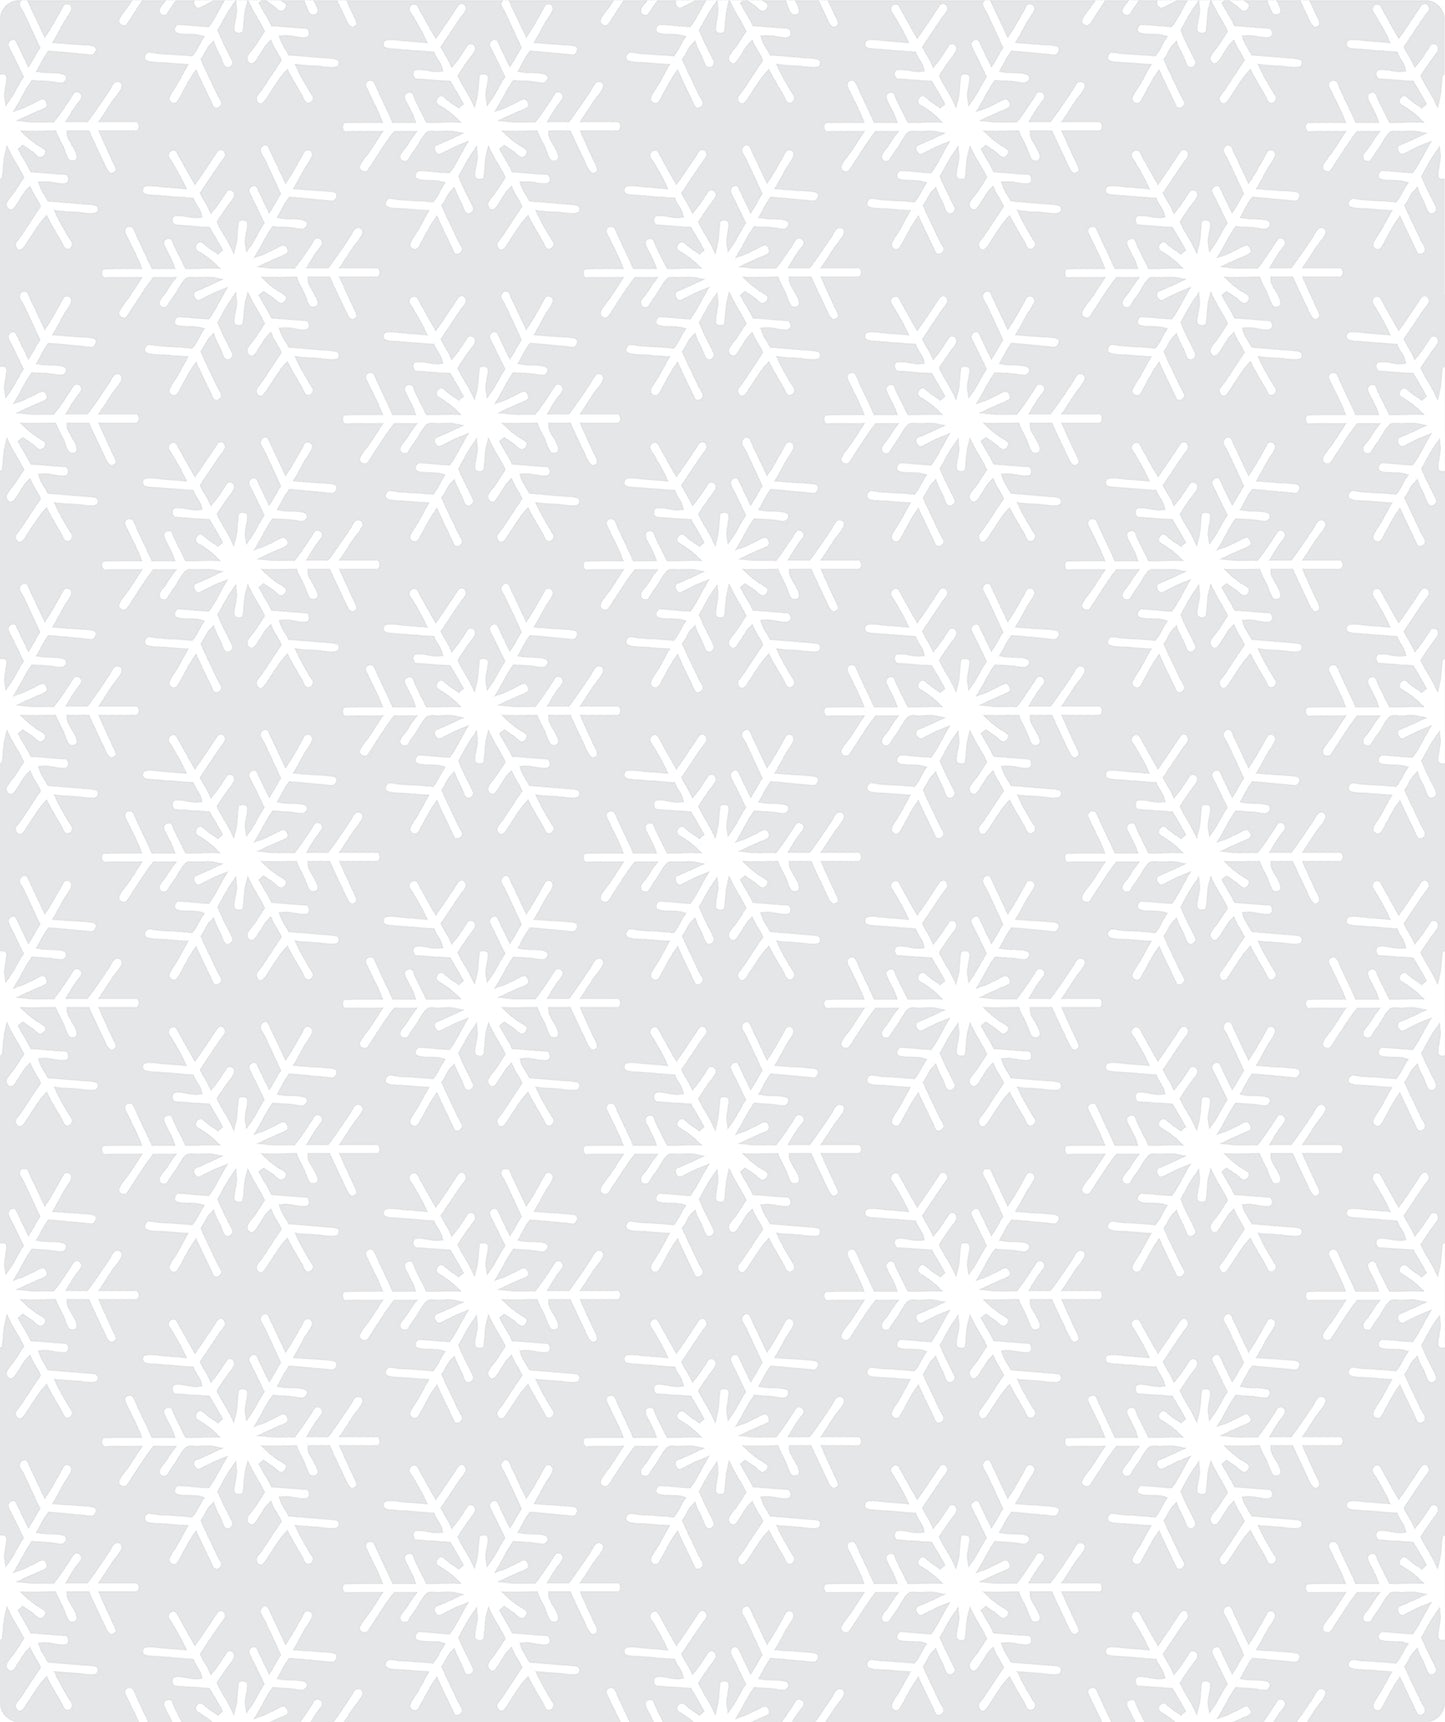 Holographic Snowflake White Foil Christmas Wrapping Paper Roll Wrapaholic Wholesale Ream